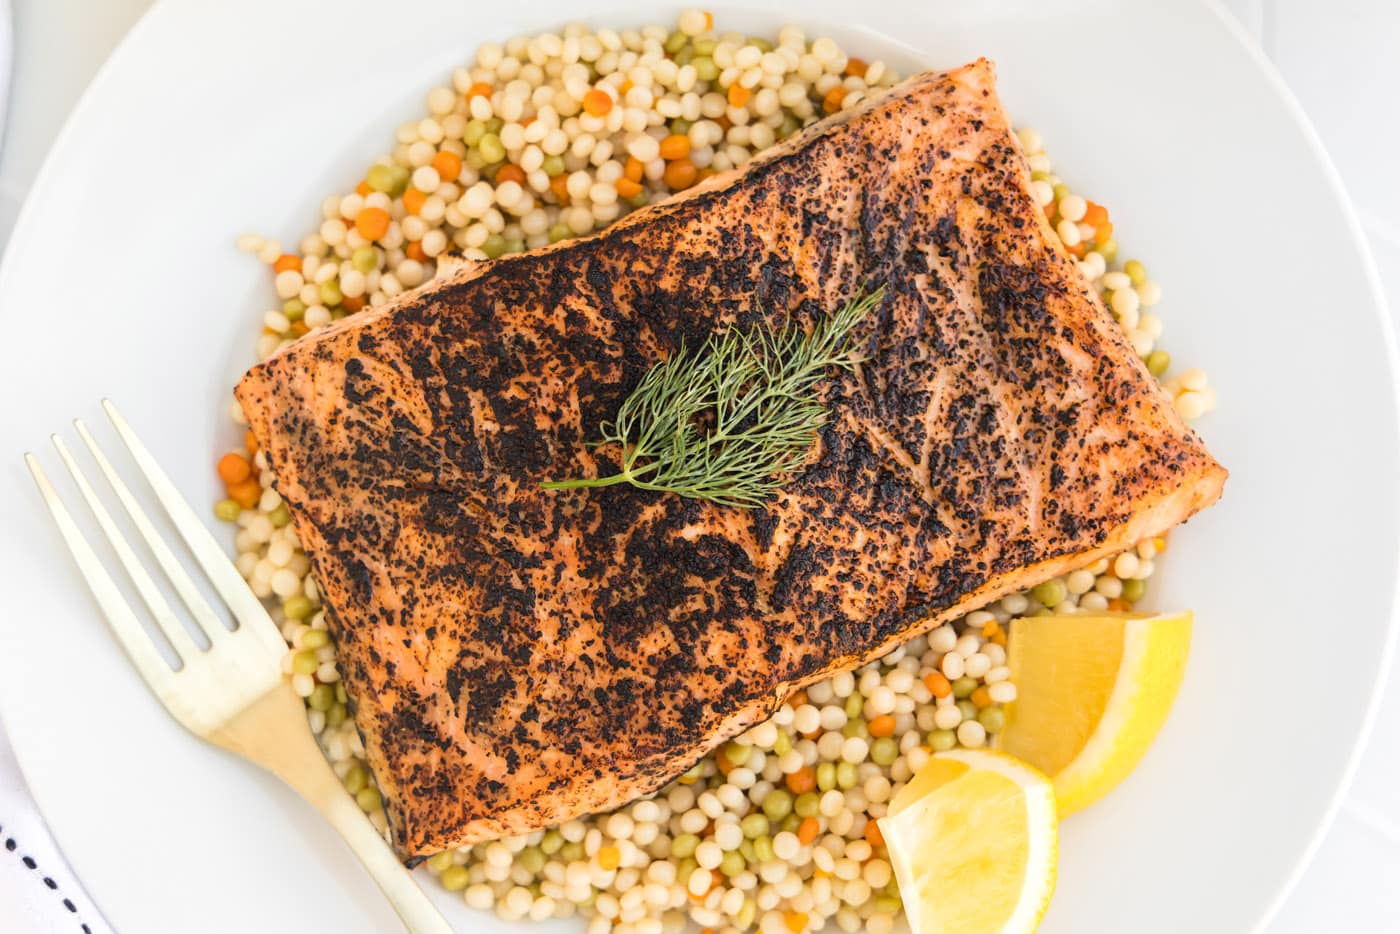 Sous vide salmon produces the most delicate, juicy, and flakey salmon you'll ever try!